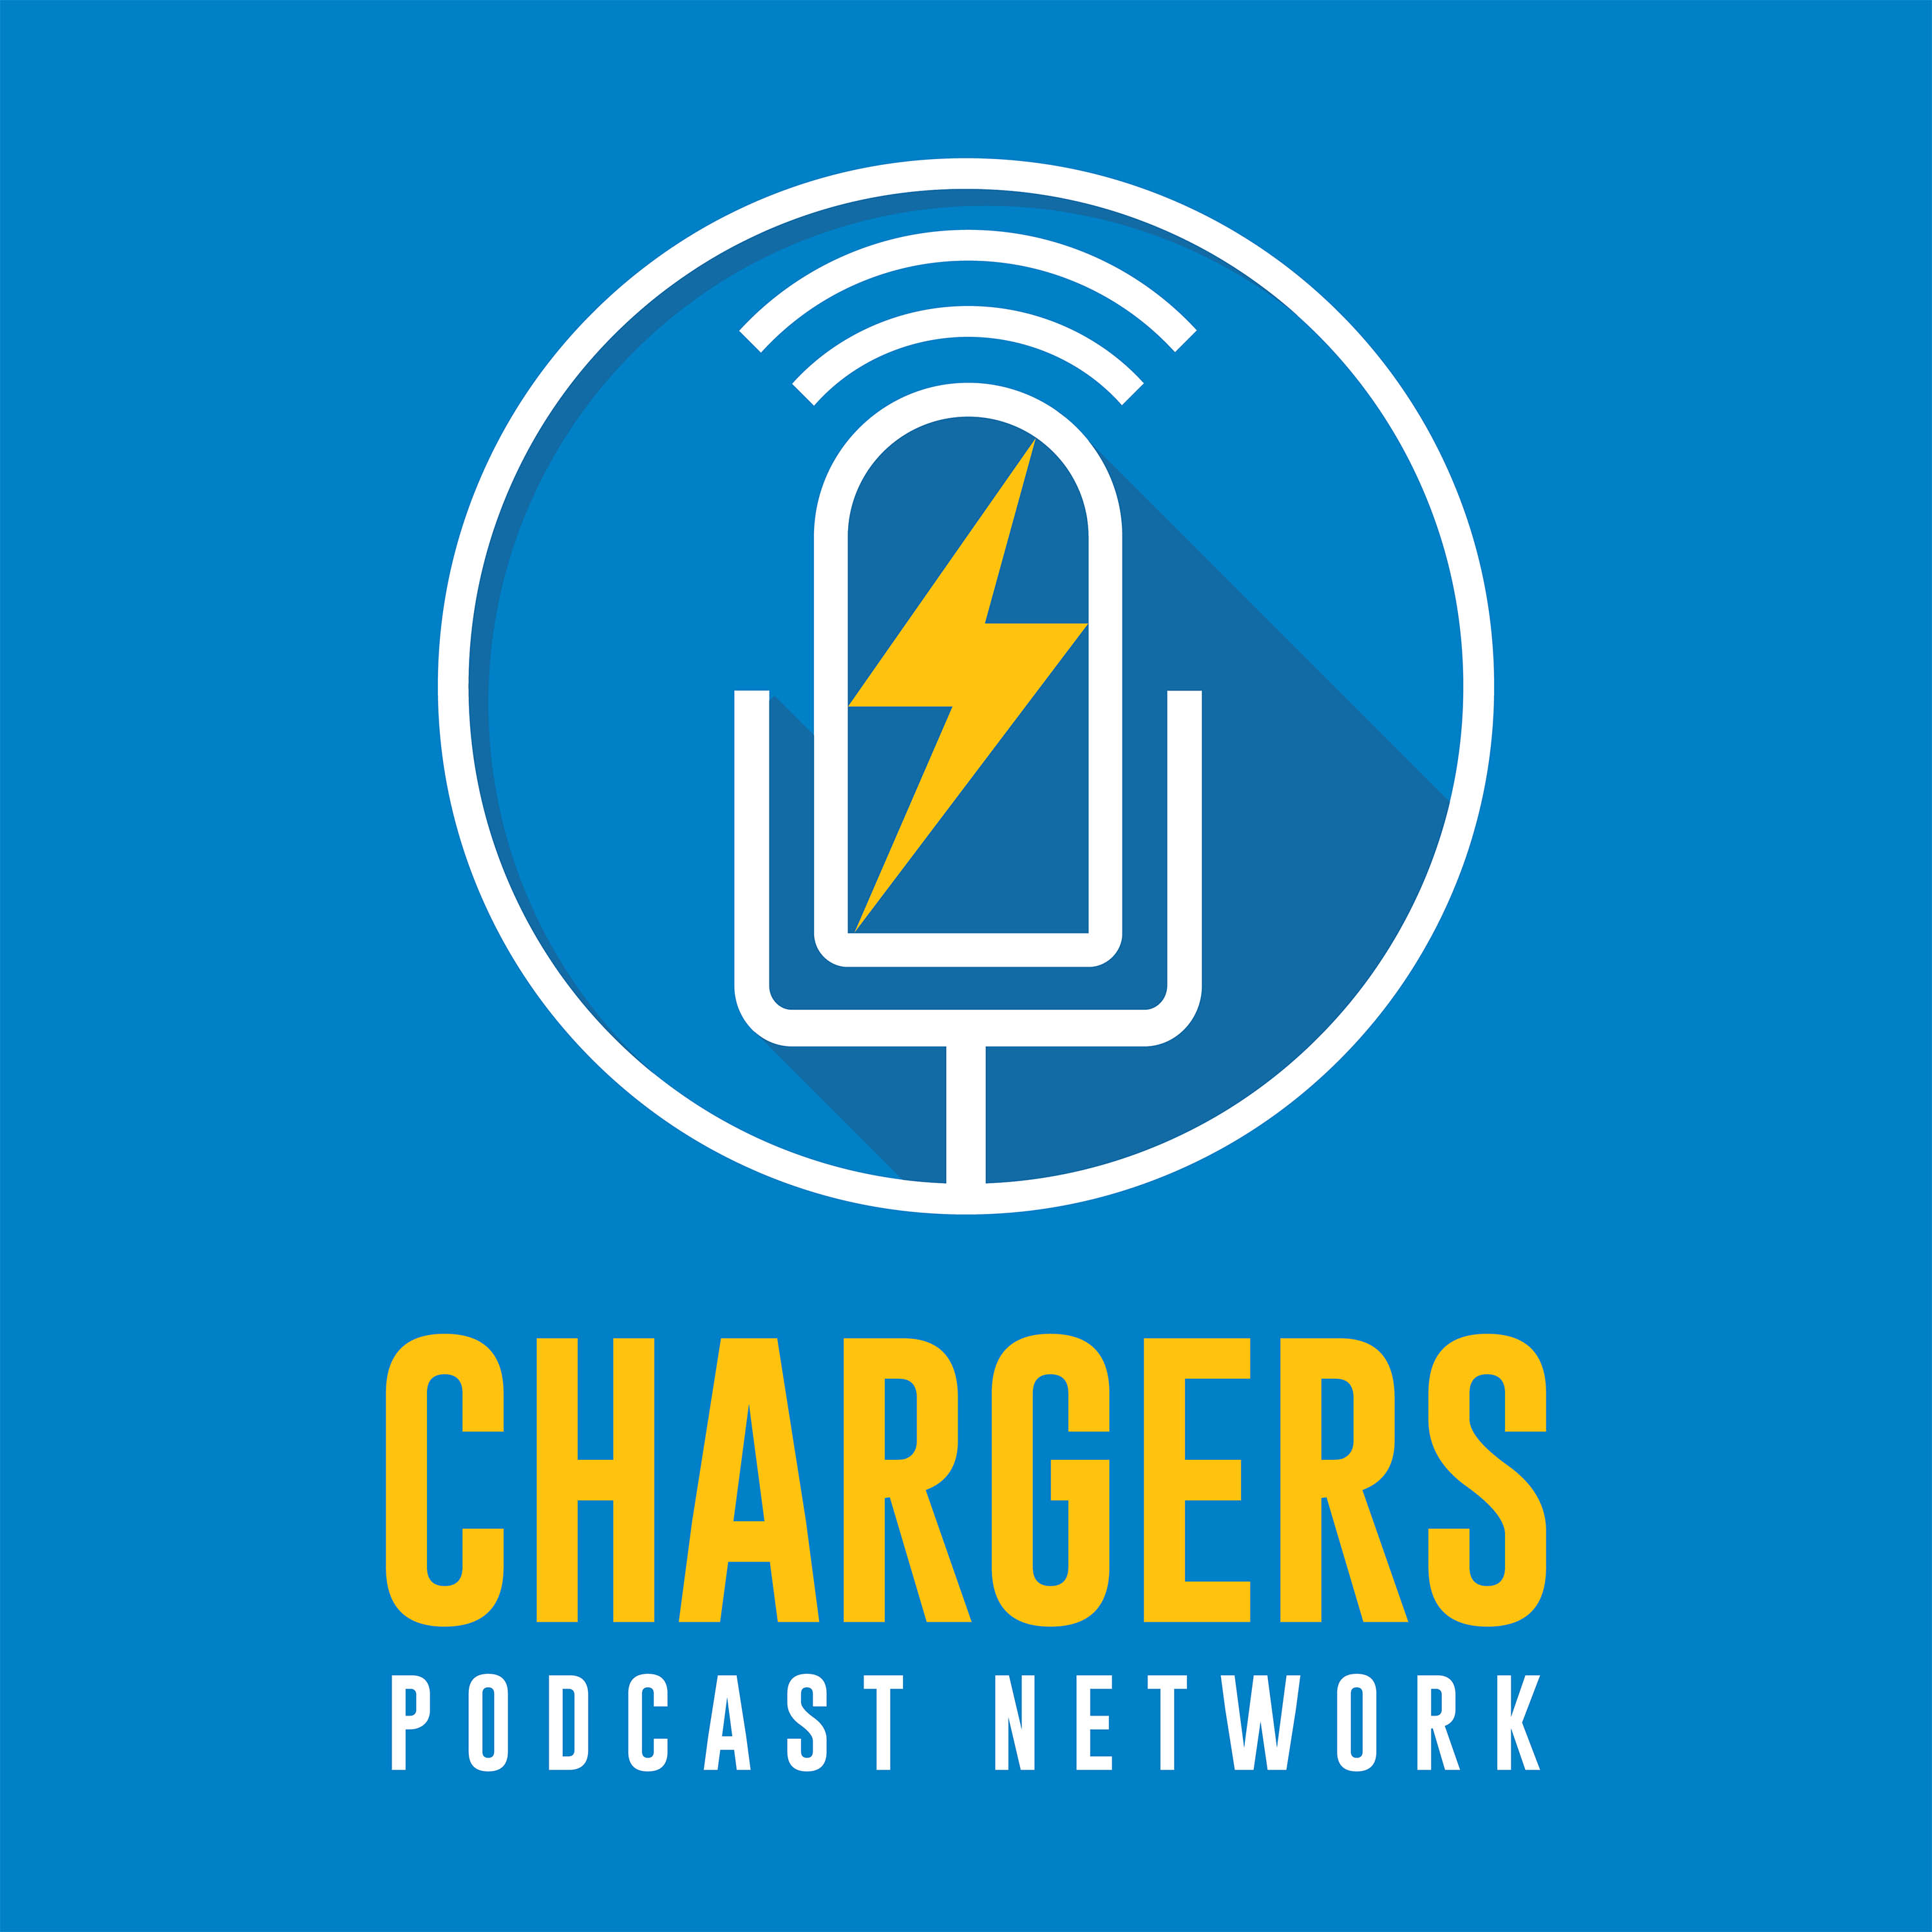 Pat McAfee Joins Chargers Weekly